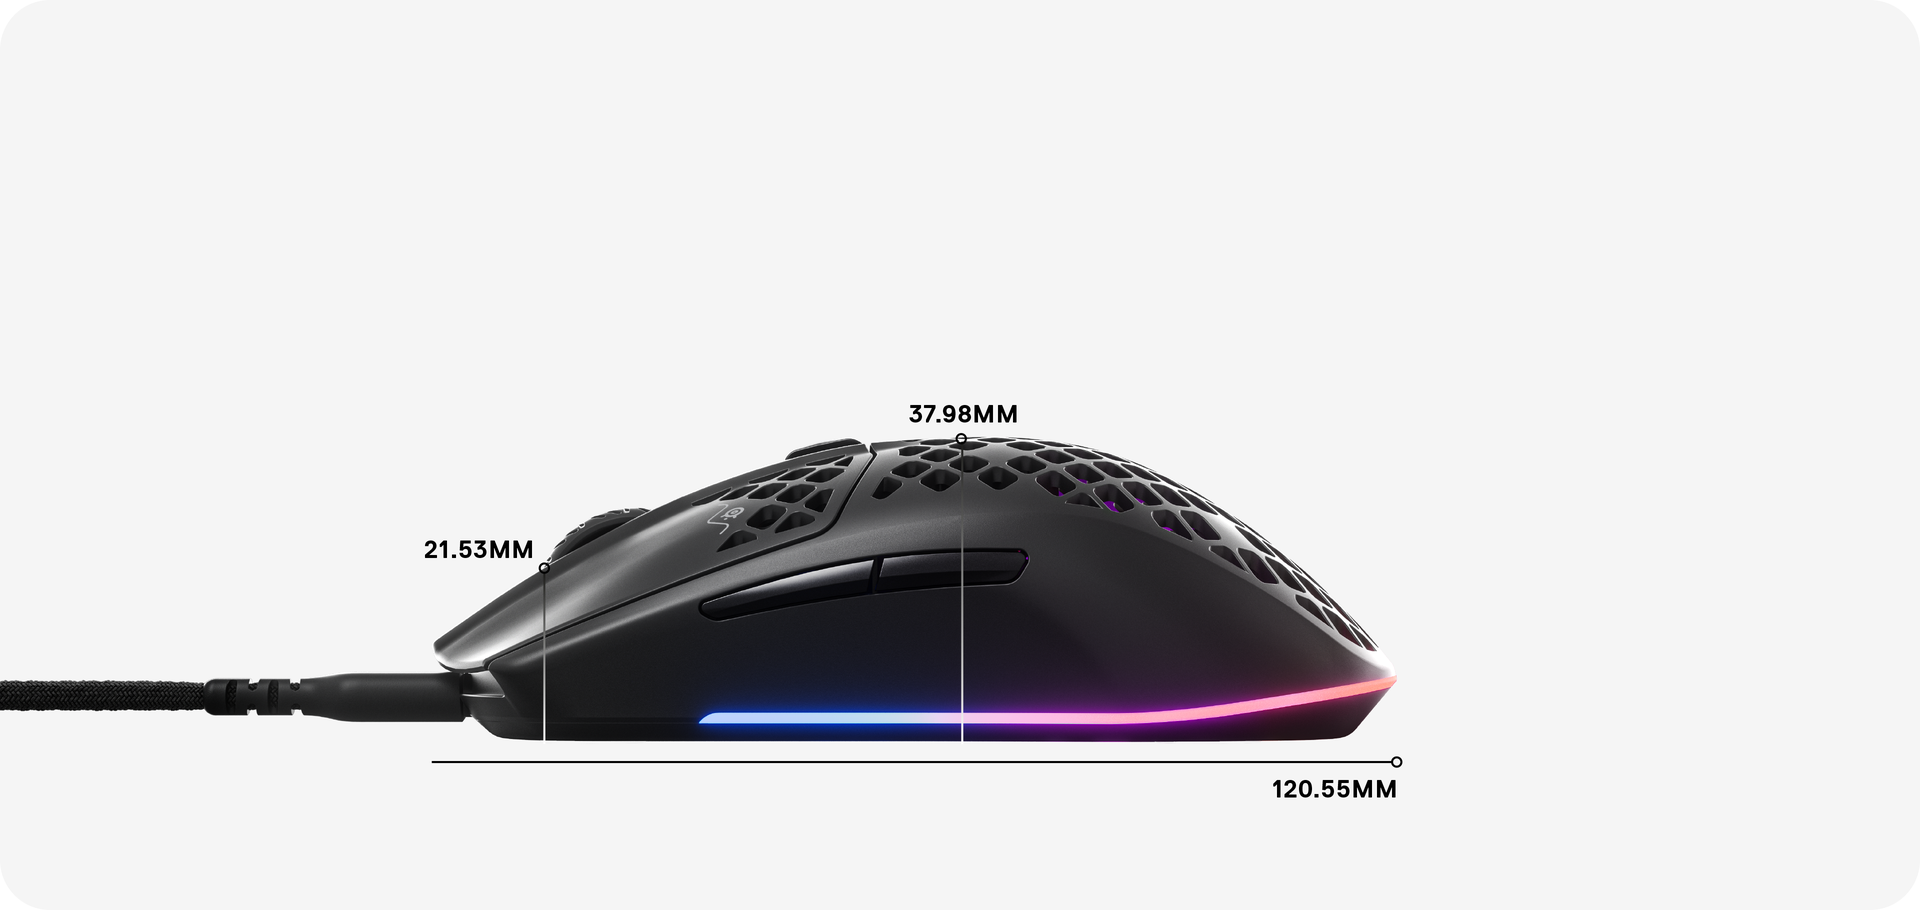 Dimensions for the mouse: 120.55 MM in length, 37.98 MM from palm rest to base, and 21.53 MM from scroll wheel to base.